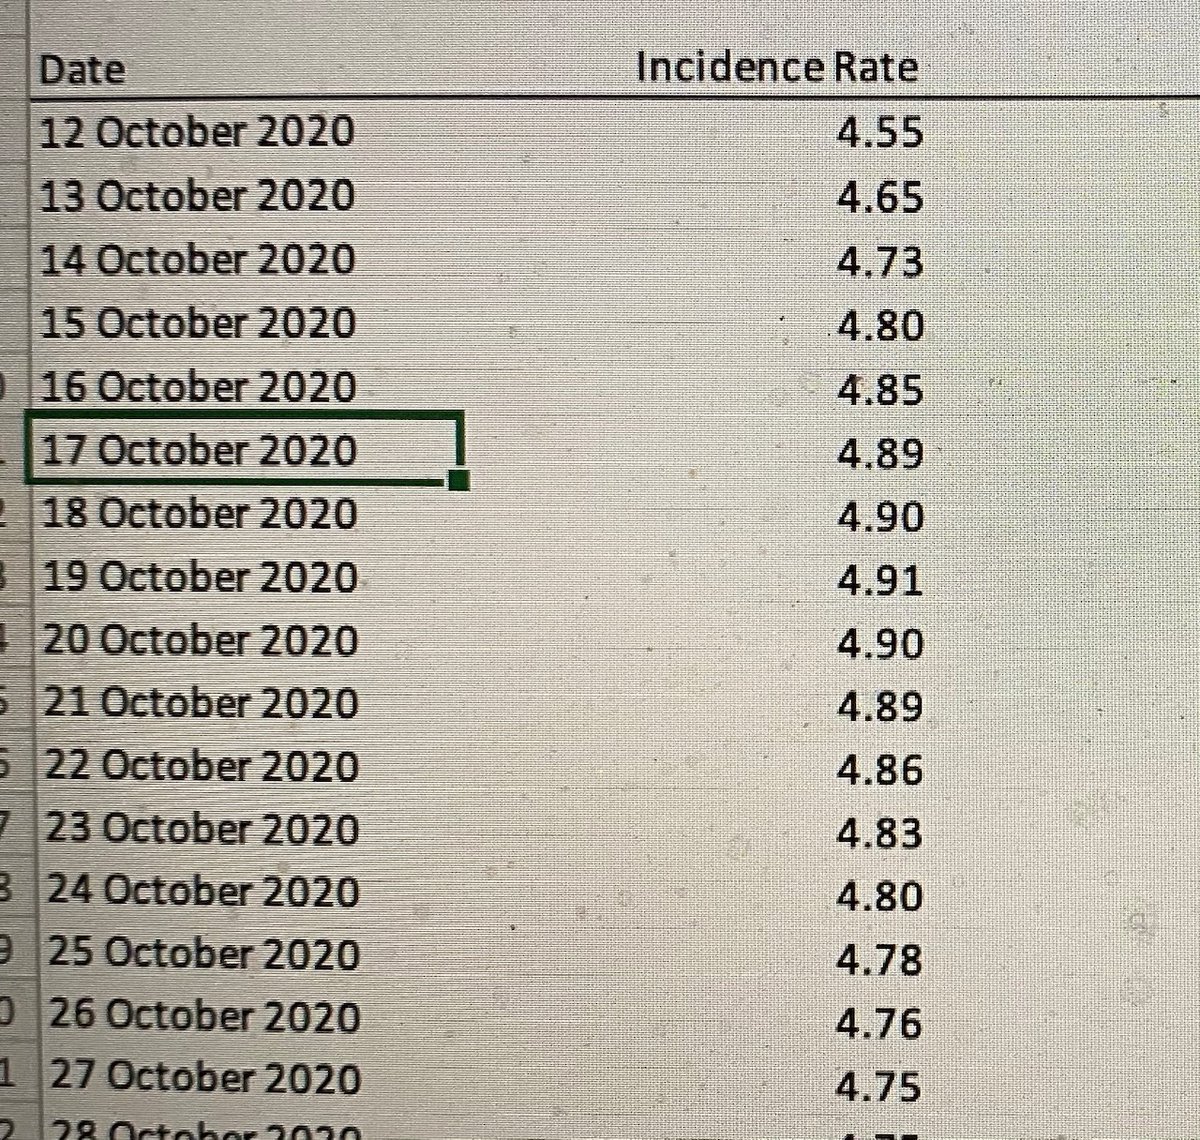 I have gone mad or am making this stuff up, I attach screenshots of the ONS's data spreadsheets for coronavirus incidence per 10,000 people for 30 October and 4 December. I have highlighted 17 October rate in both cases.